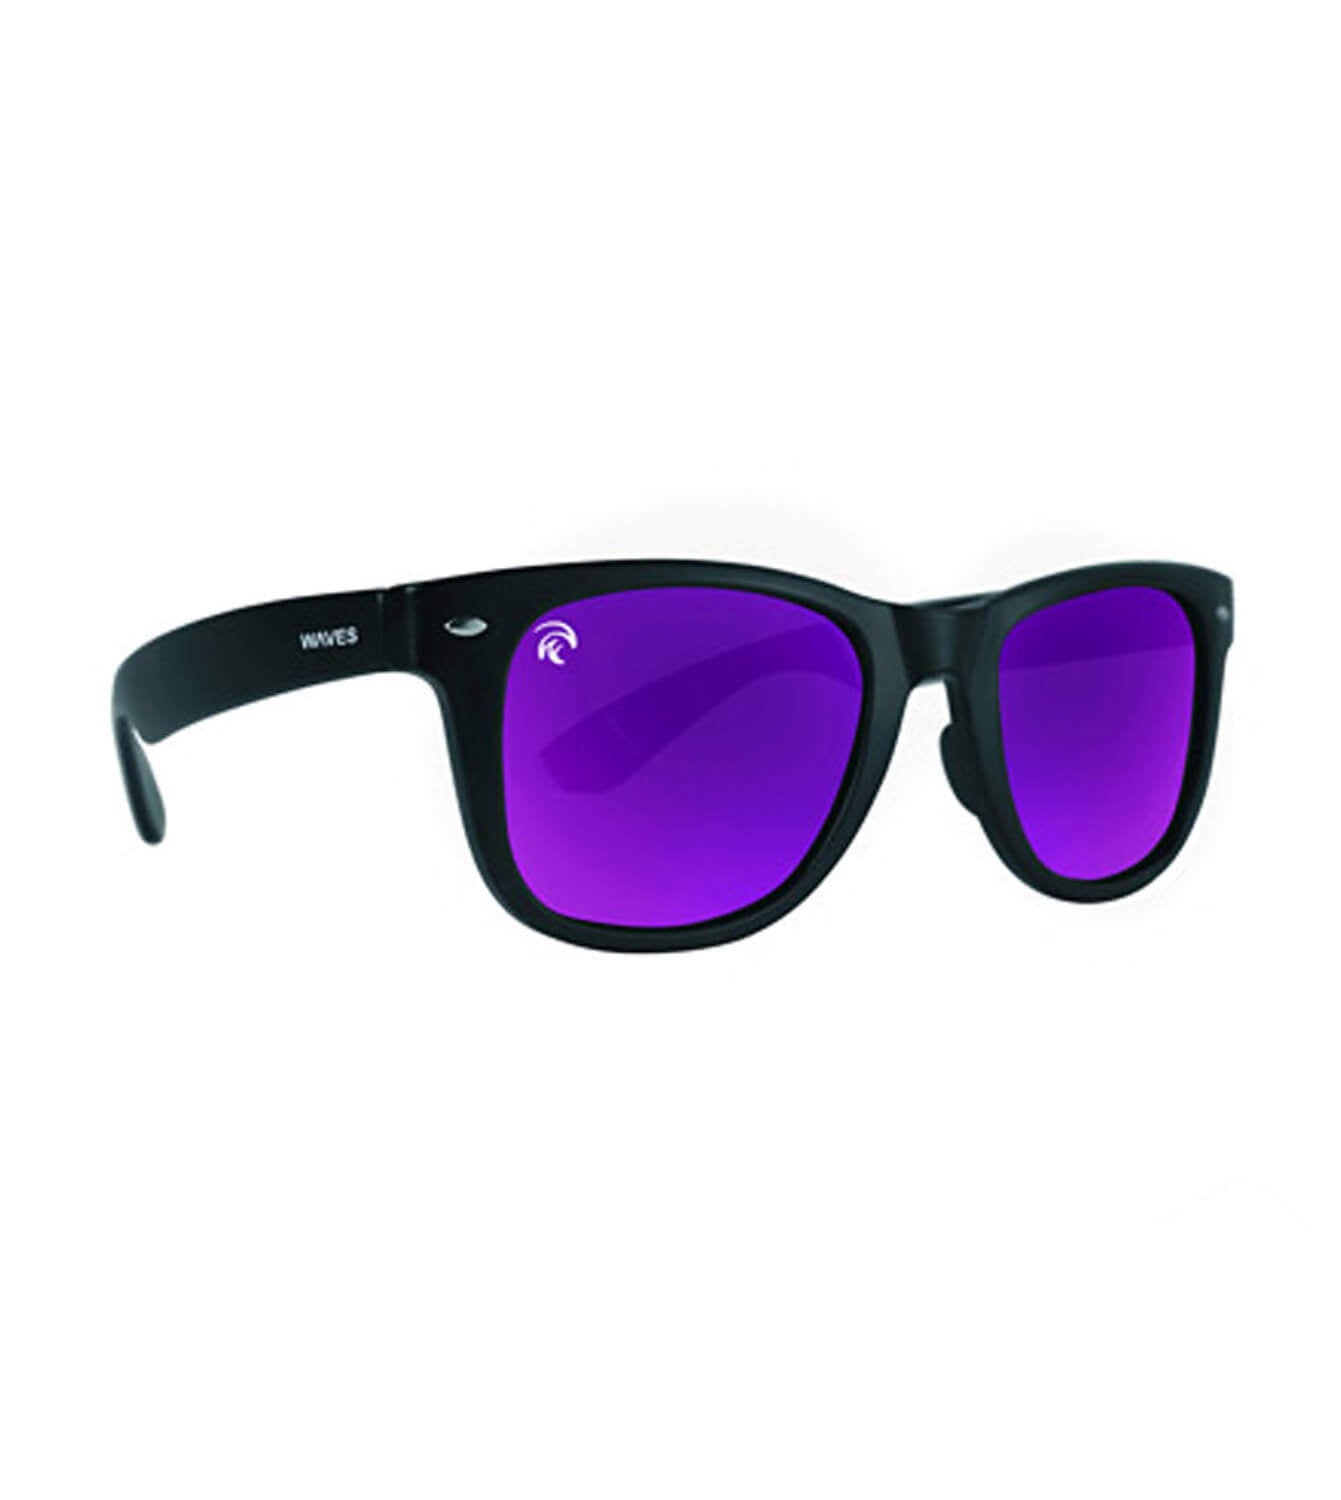 WAVES GEAR CLASSIC POLARIZED FLOATING SUNGLASSES<